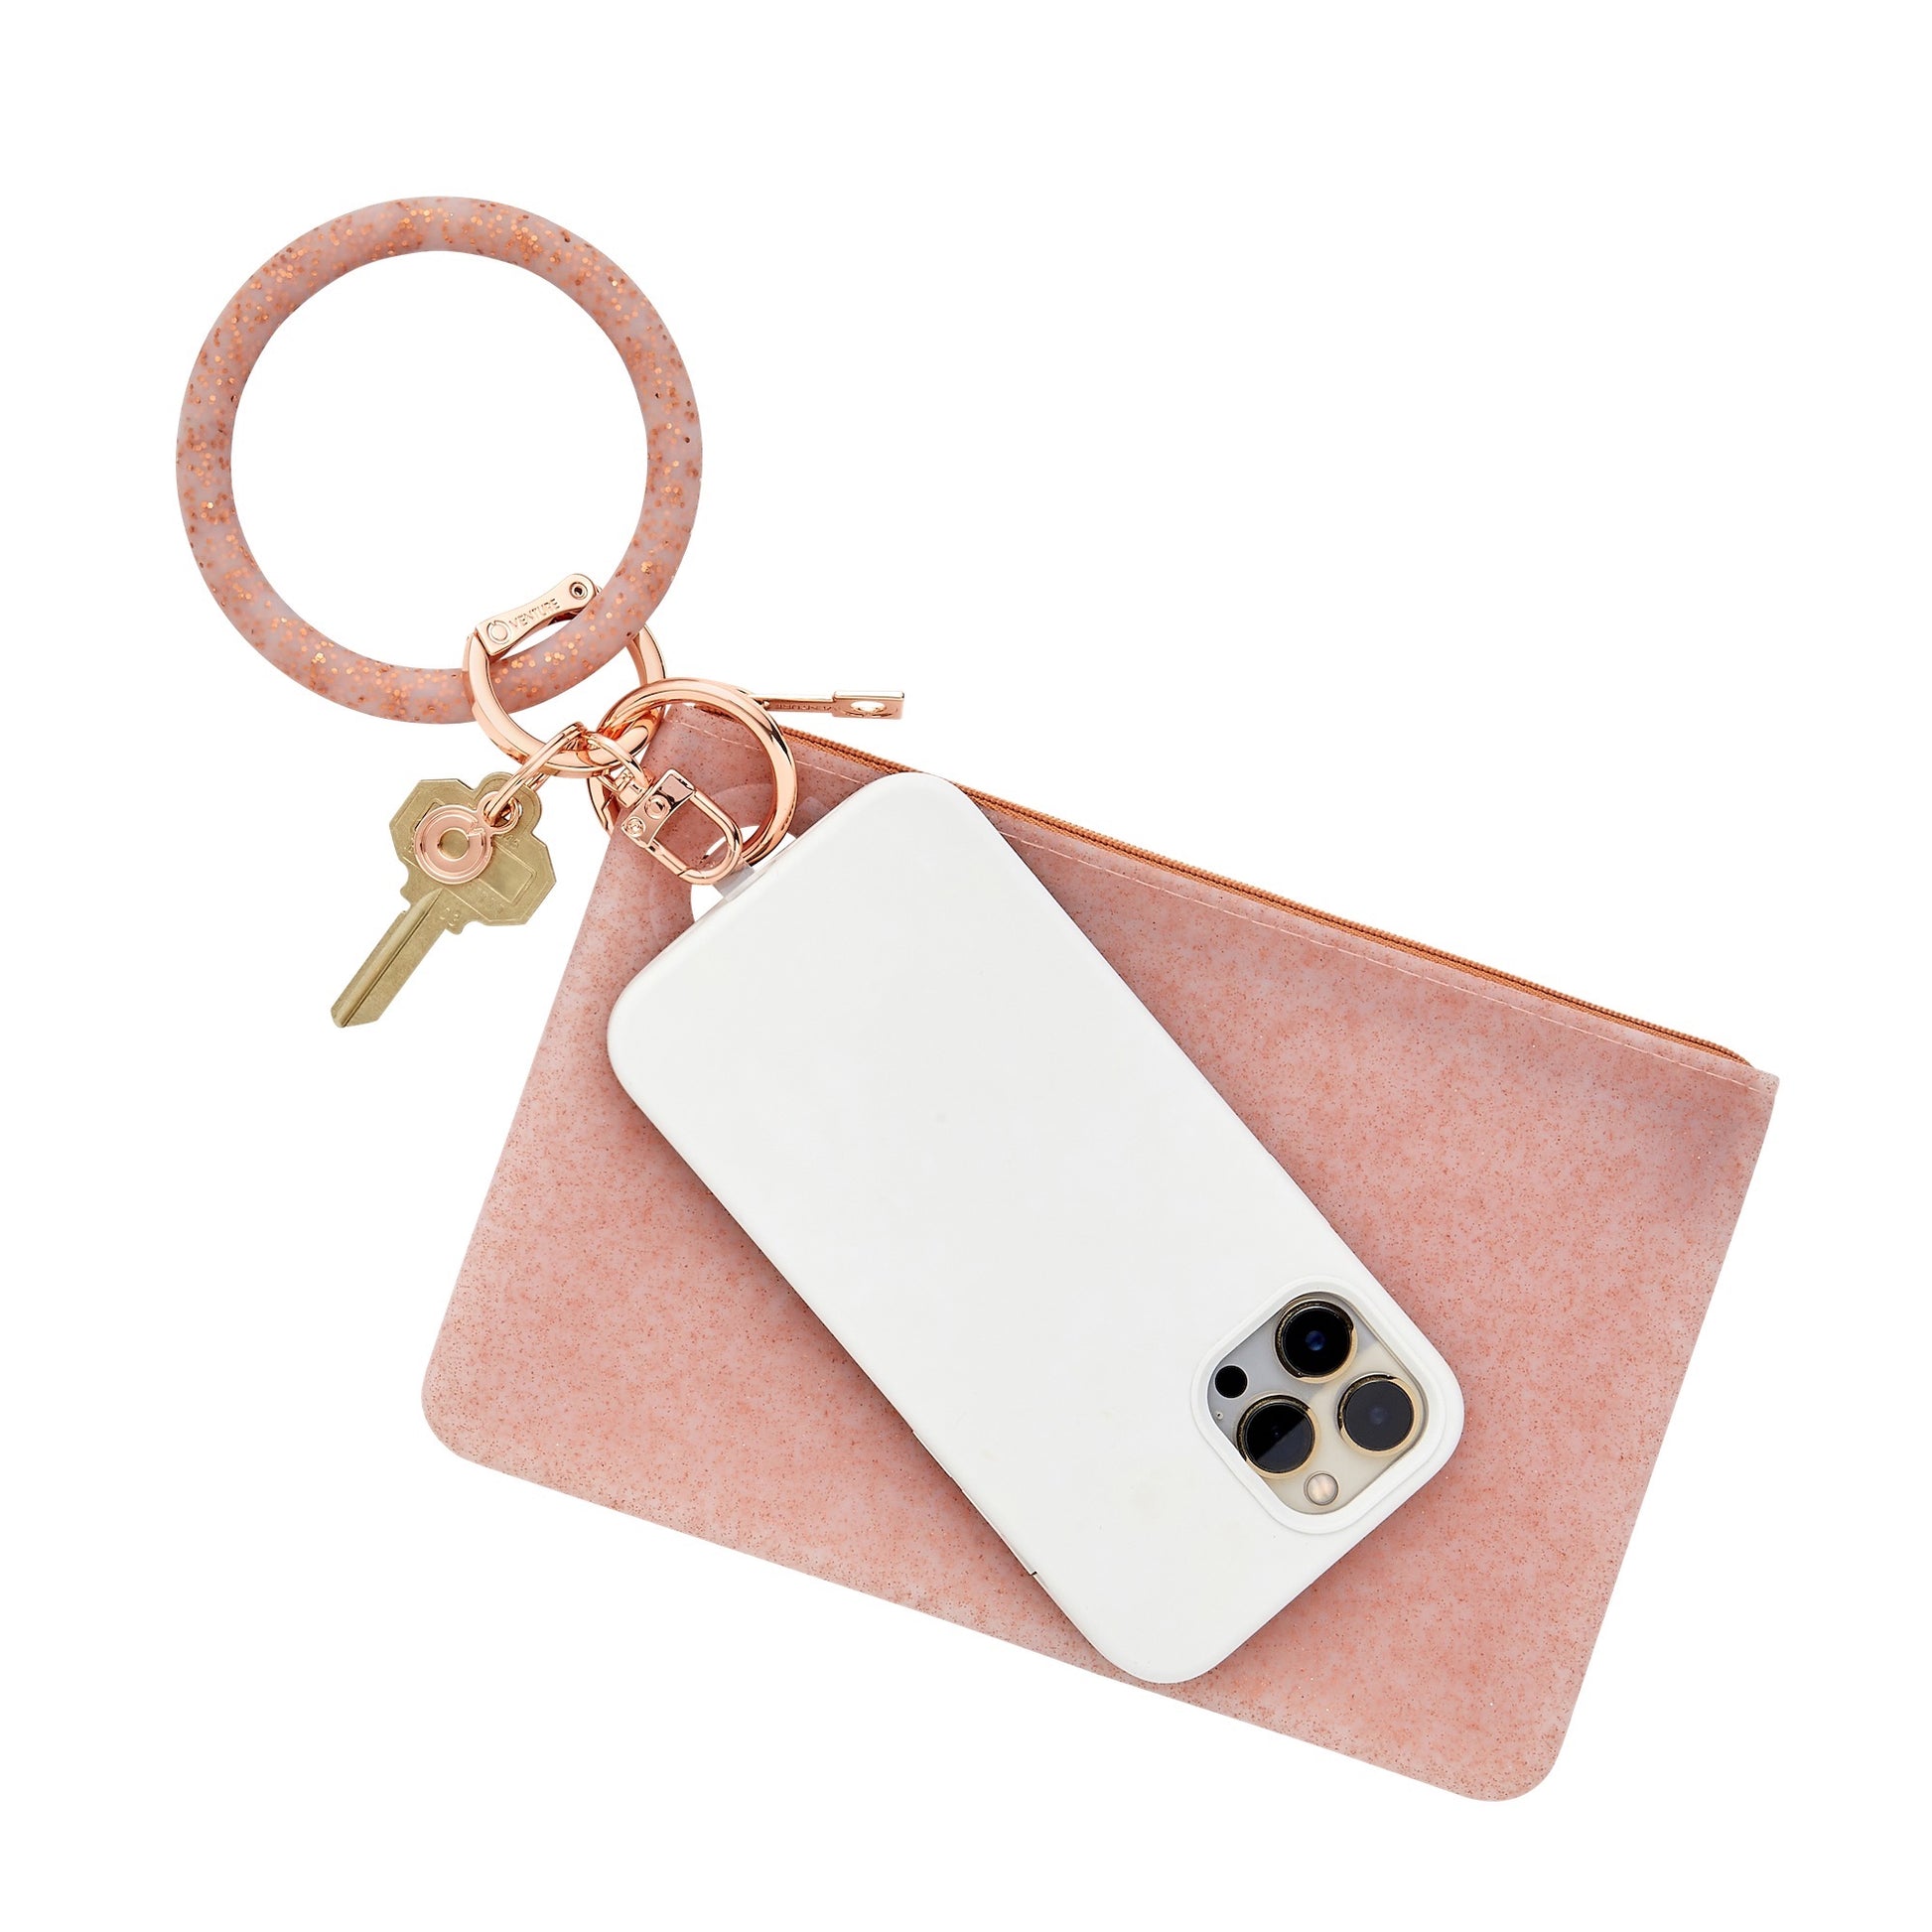 Stylish Large Pouch Wristlet with Phone Holder in rose gold confetti.